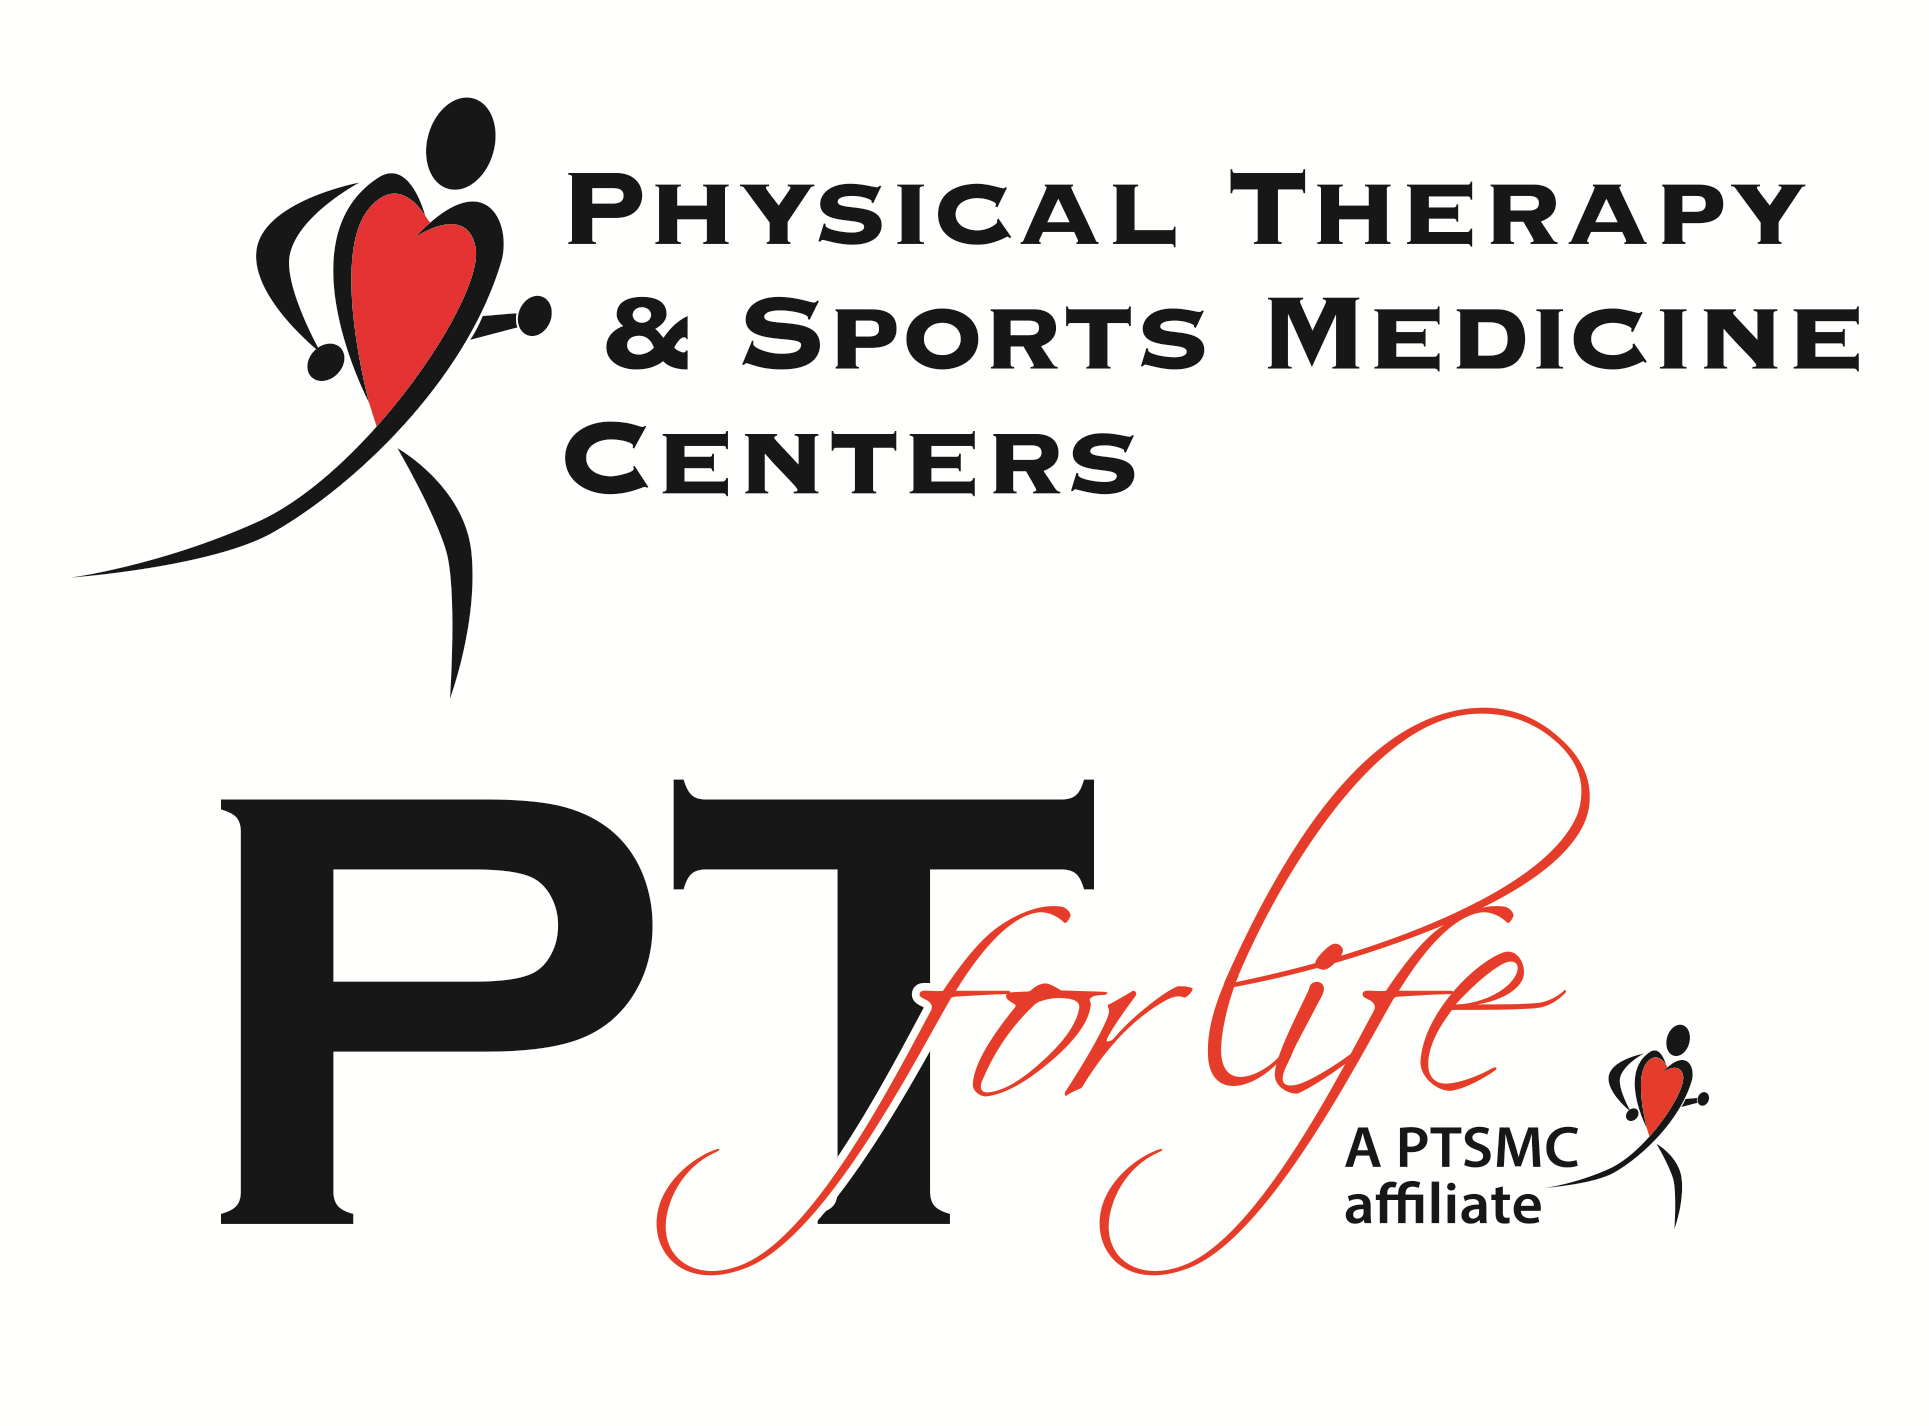 Physical Therapy & Sports Medicine Centers logo